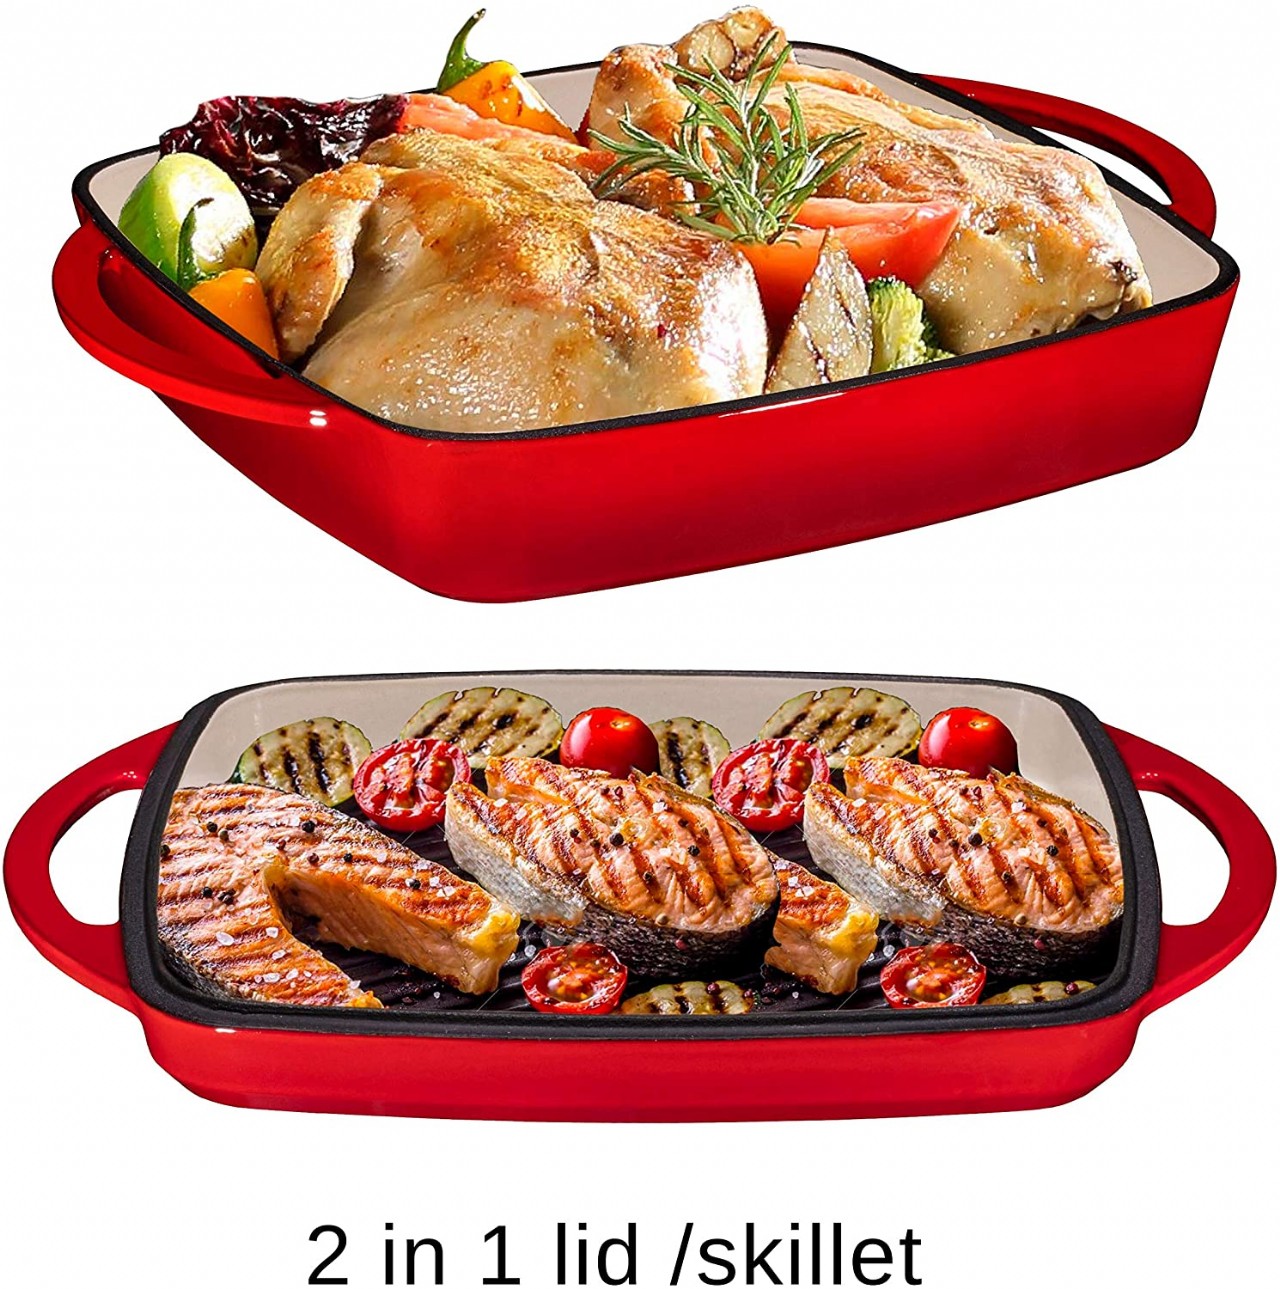 2 in 1 Enameled Cast Iron 11 Inch Square Casserole Baking Pan With Griddle Lid 2 in 1 Multi Baker